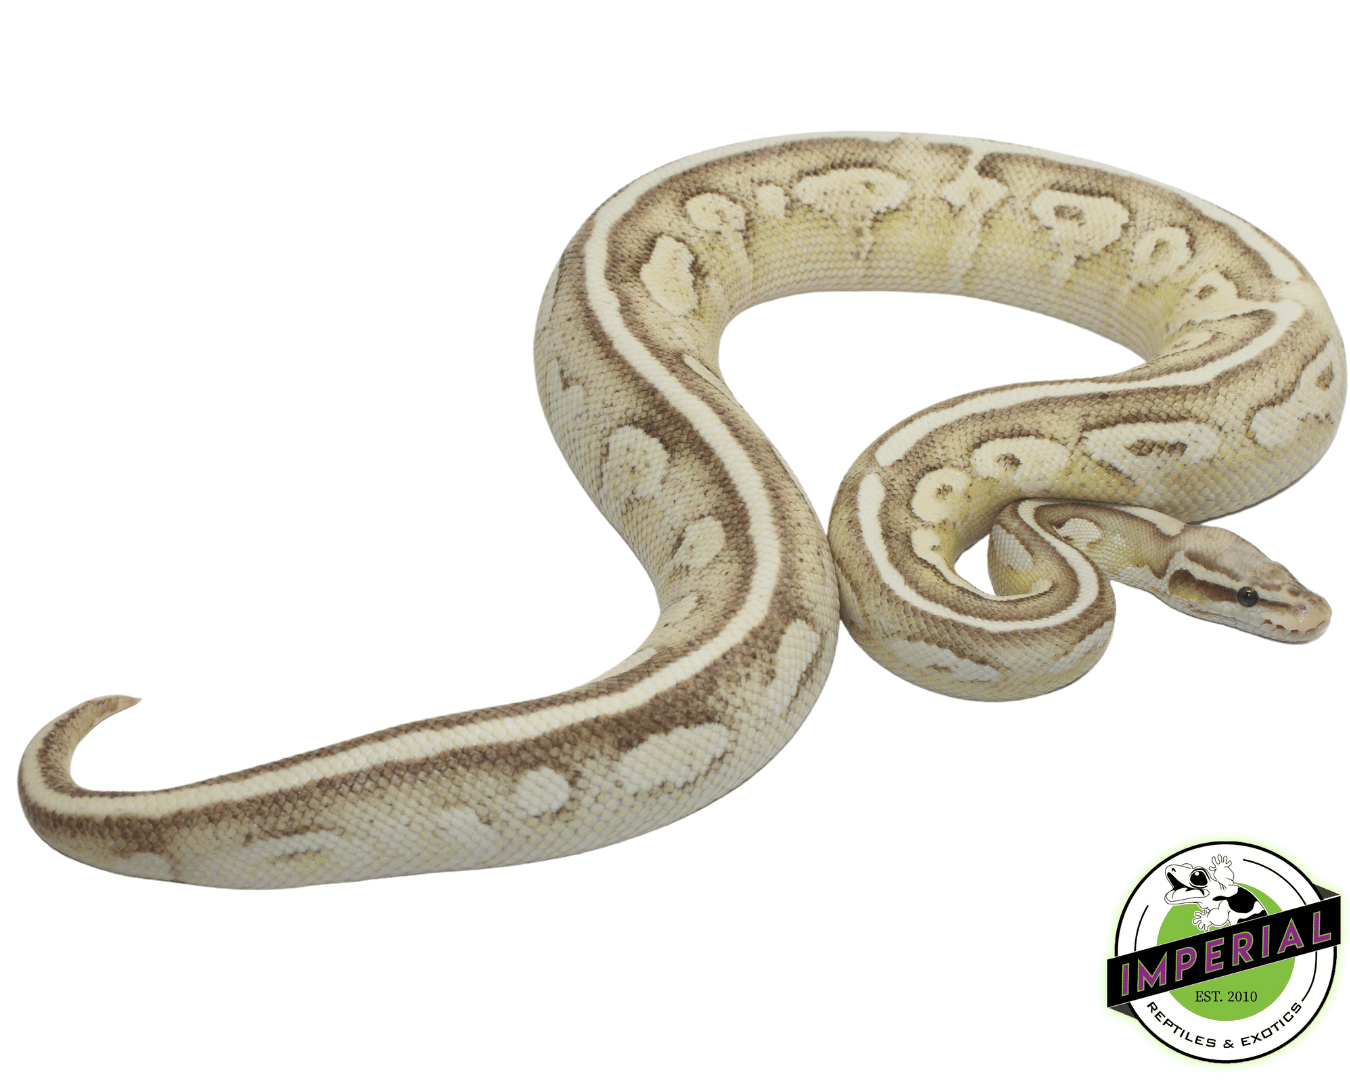 Pastel Lesser Vanilla Yellowbelly pos Fader ball python for sale near me, buy ball pythons online at cheap prices